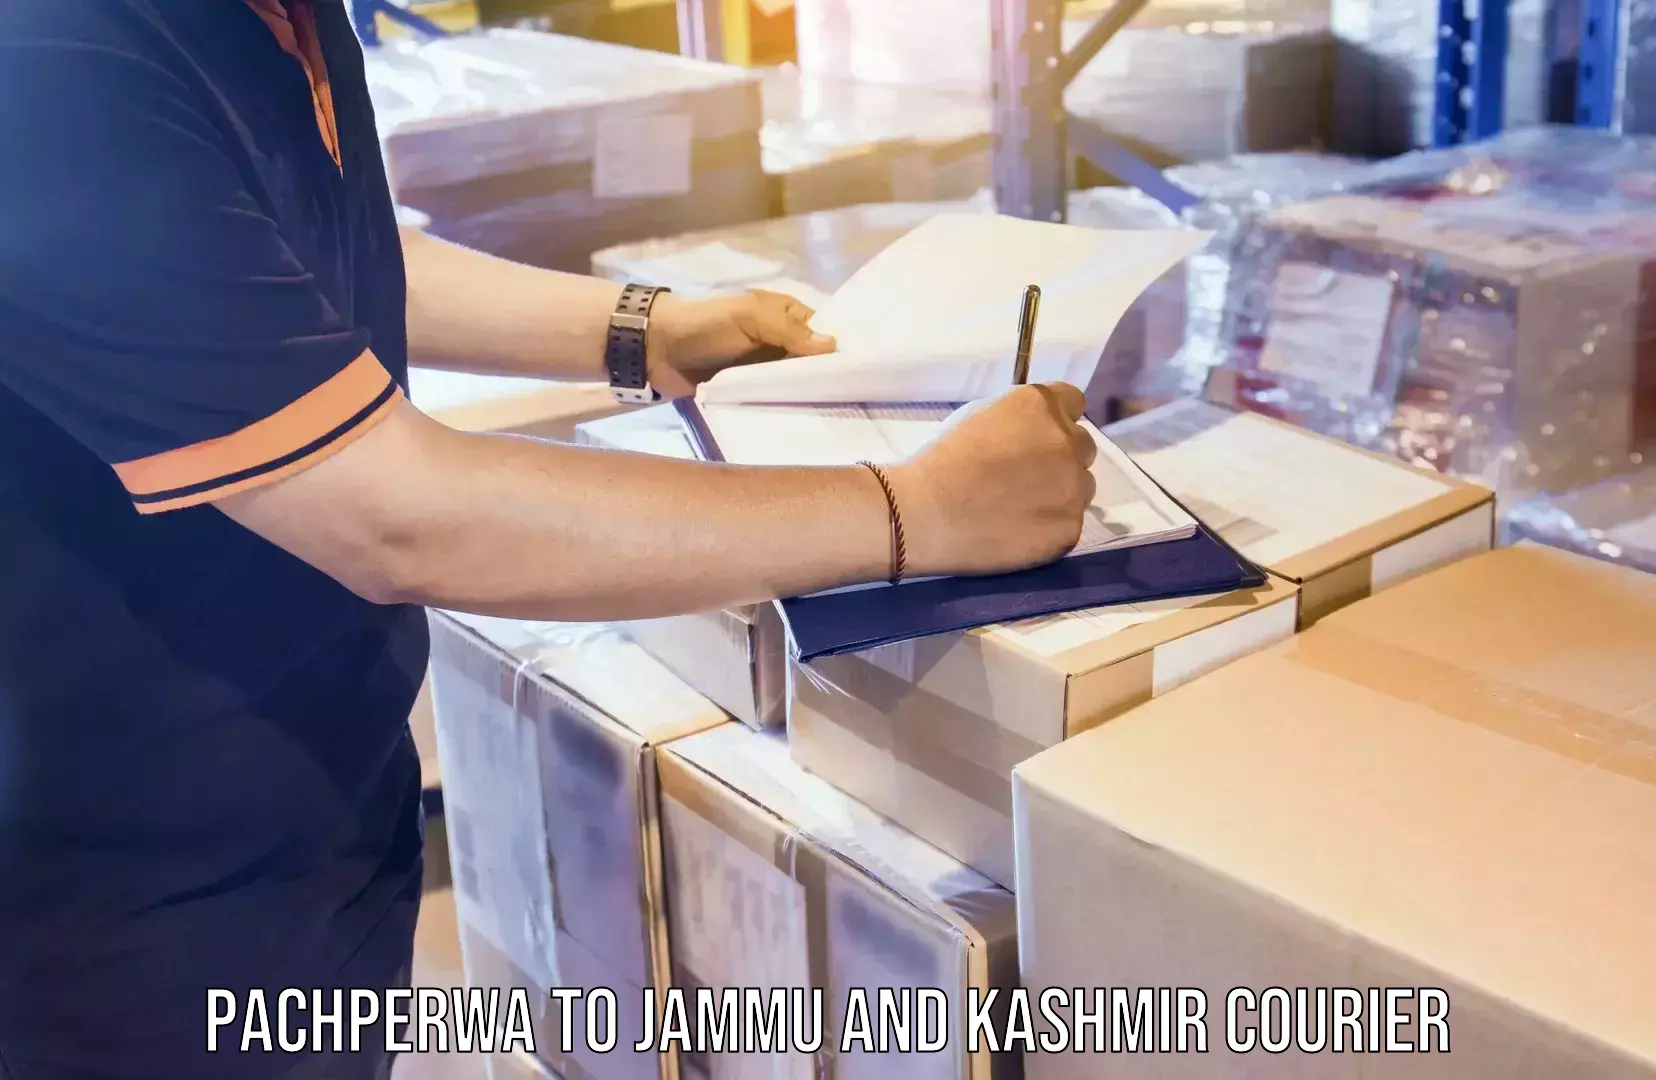 Home moving experts Pachperwa to Jammu and Kashmir